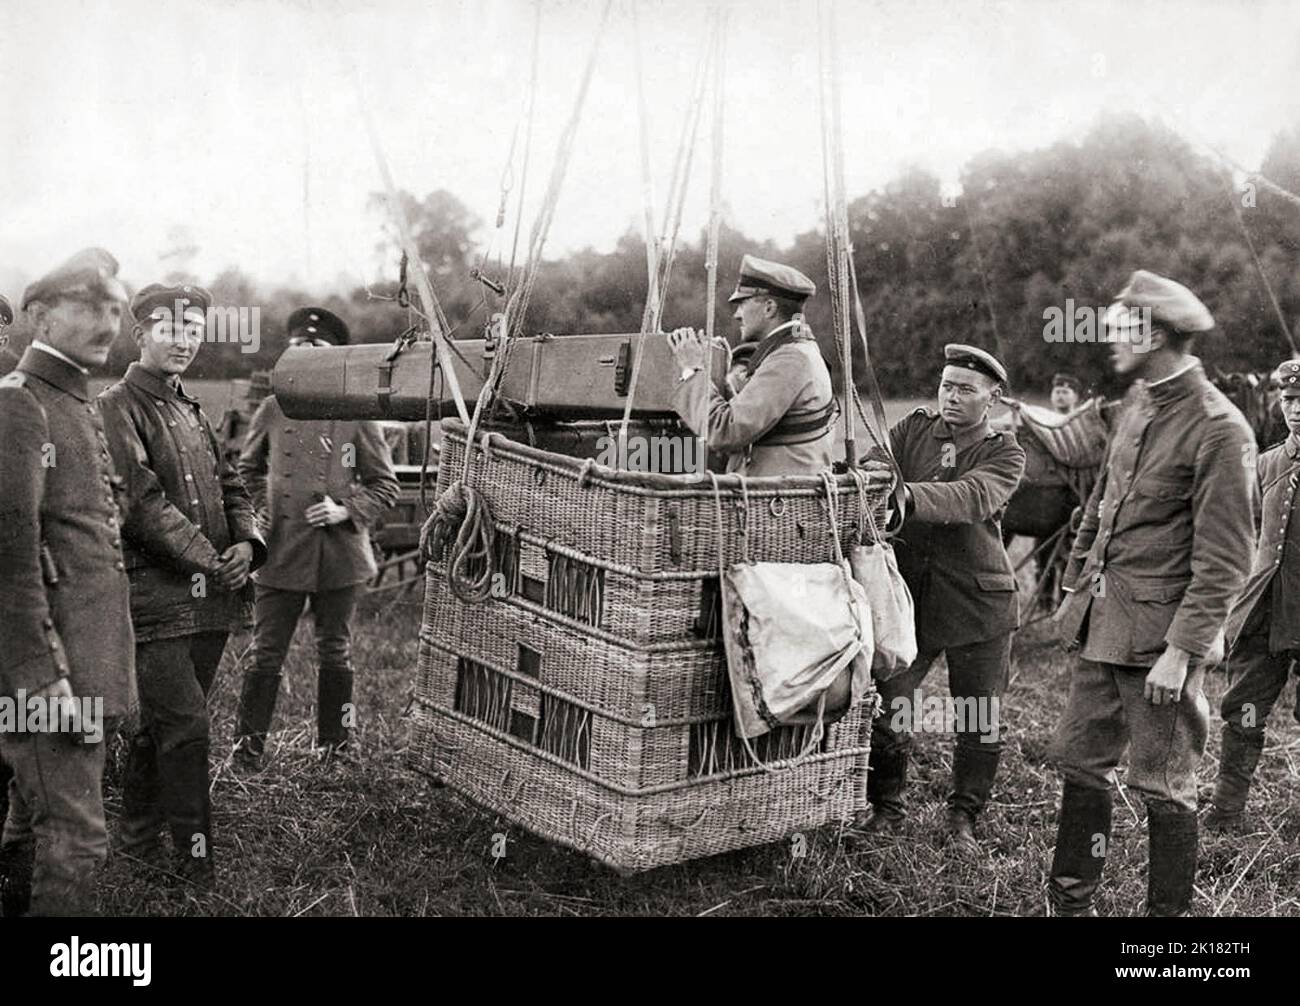 A German observation balloon fitted with a long-distance camera. 1916. They were employed as an aerial platform for intelligence gathering and artillery spotting. The balloons were filled with hydrogen gas, whose flammable nature led to the destruction of hundreds of balloons on both sides. Typically, balloons were tethered to a steel cable attached to a winch that reeled the gasbag to its desired height (usually 1,000-1,500 metres) and retrieved it at the end of an observation session. Stock Photo